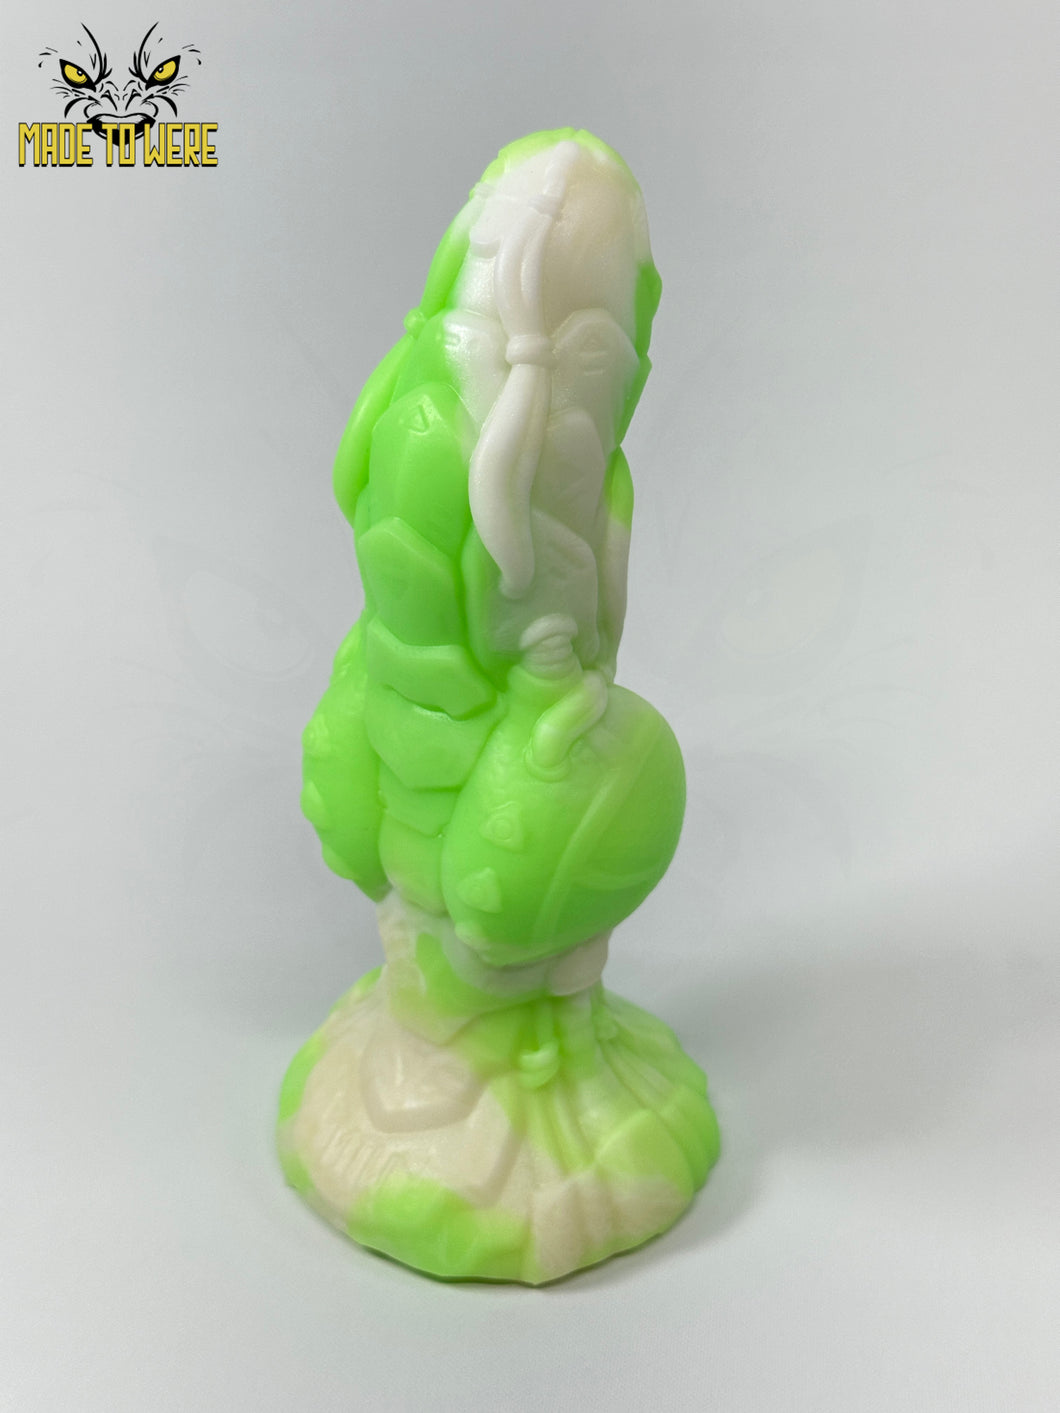 Small Render, Soft 00-30 Firmness, Key Lime